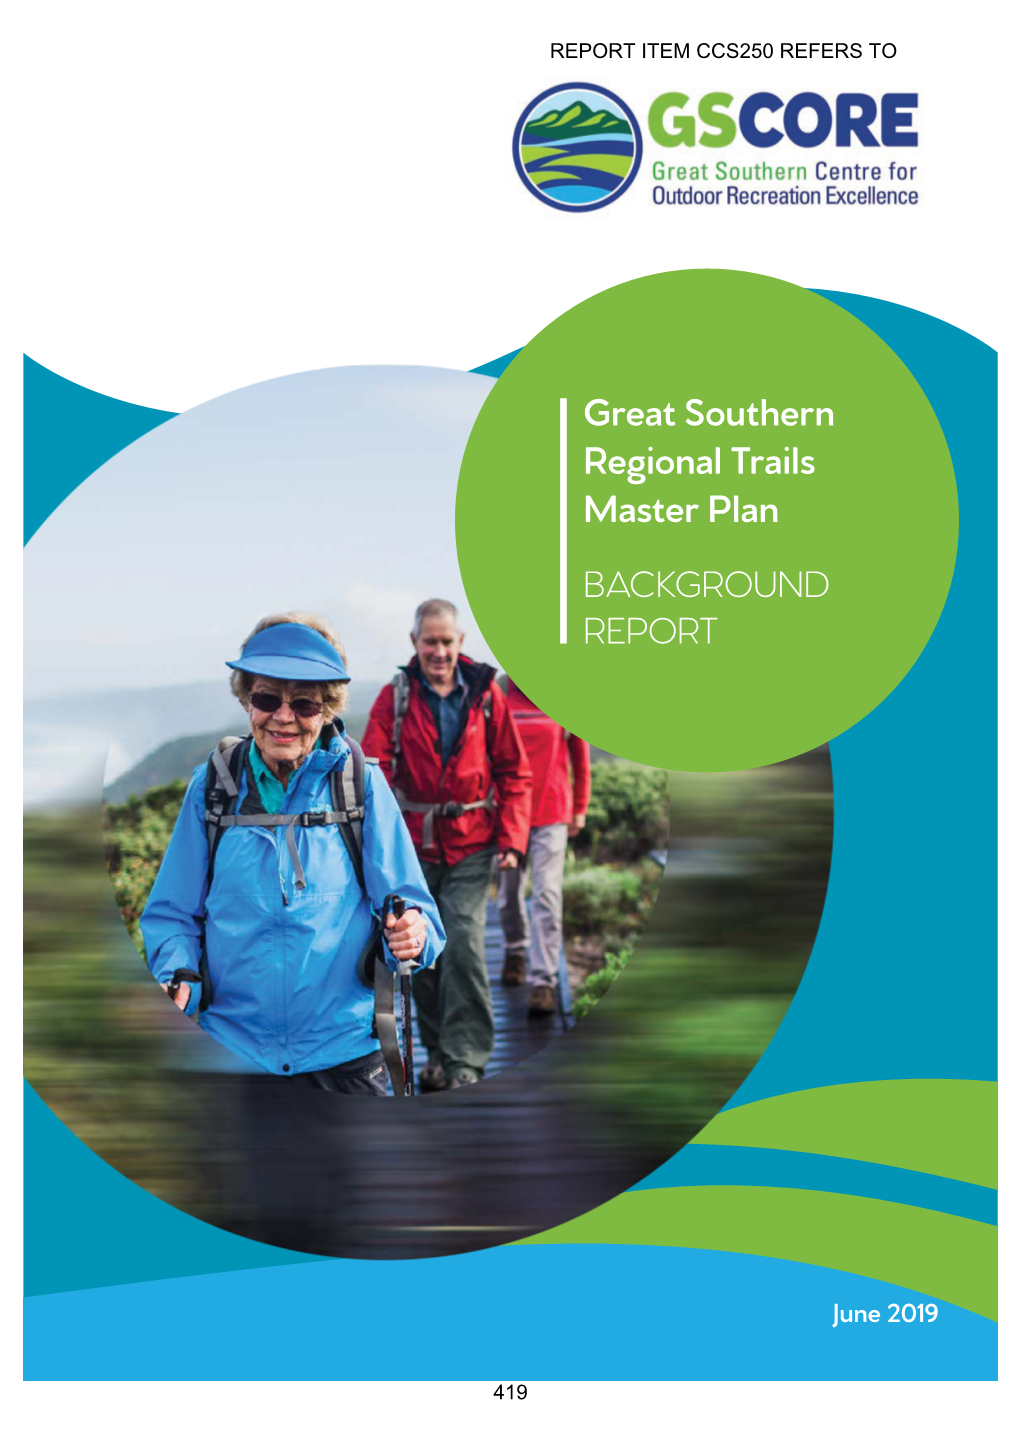 Great Southern Regional Trails Master Plan BACKGROUND REPORT